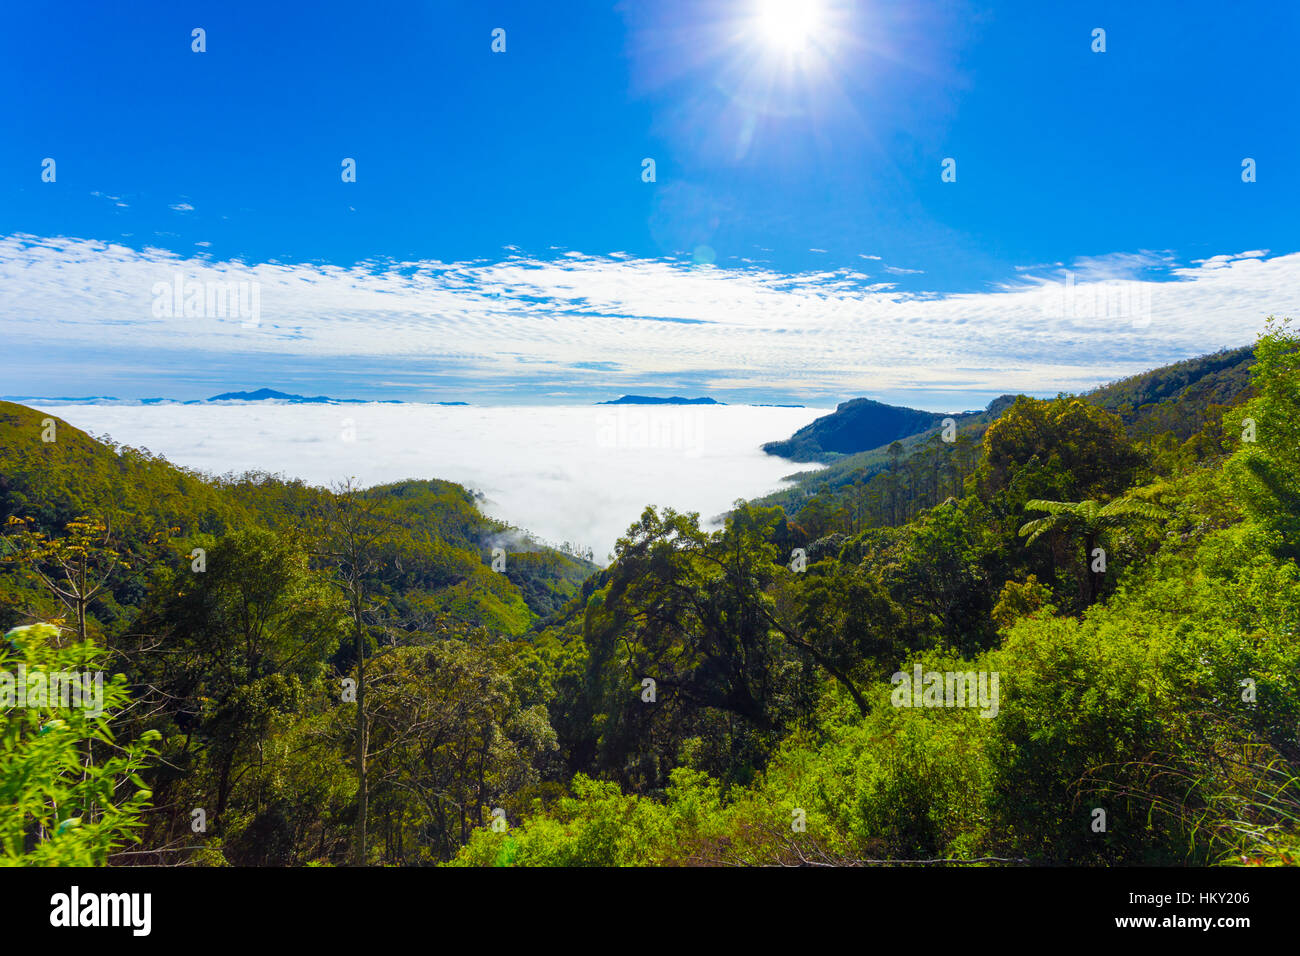 A sea of clouds blankets the valley below seen from above in the mountains of hill country in Haputale, Sri Lanka. Horizontal Stock Photo